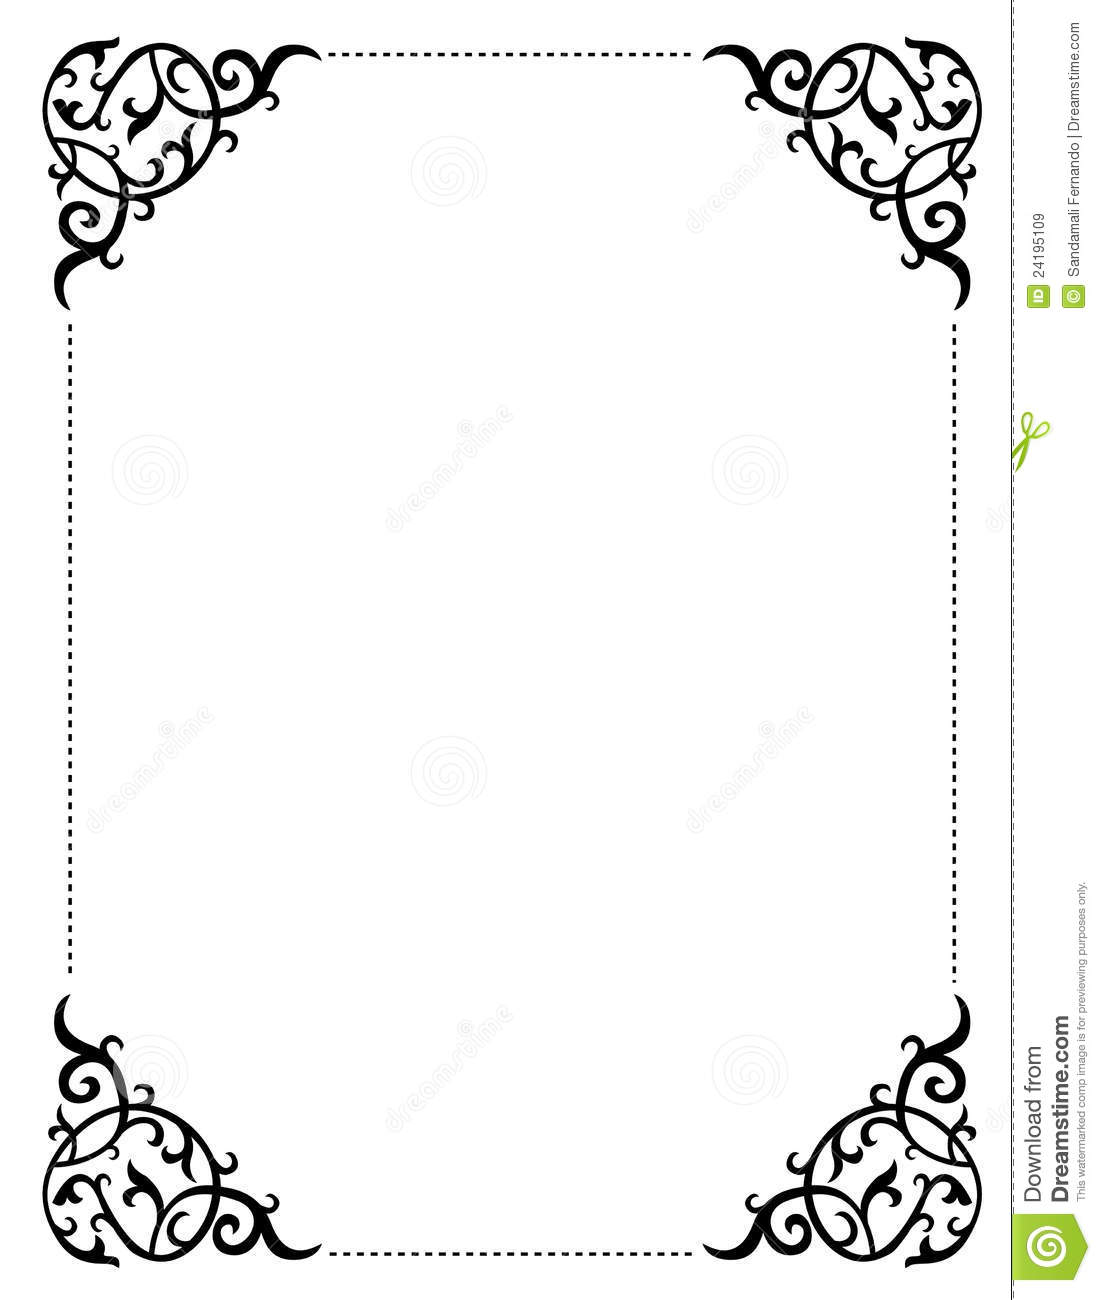 Free Printable Wedding Clip Art Borders And Backgrounds Invitation